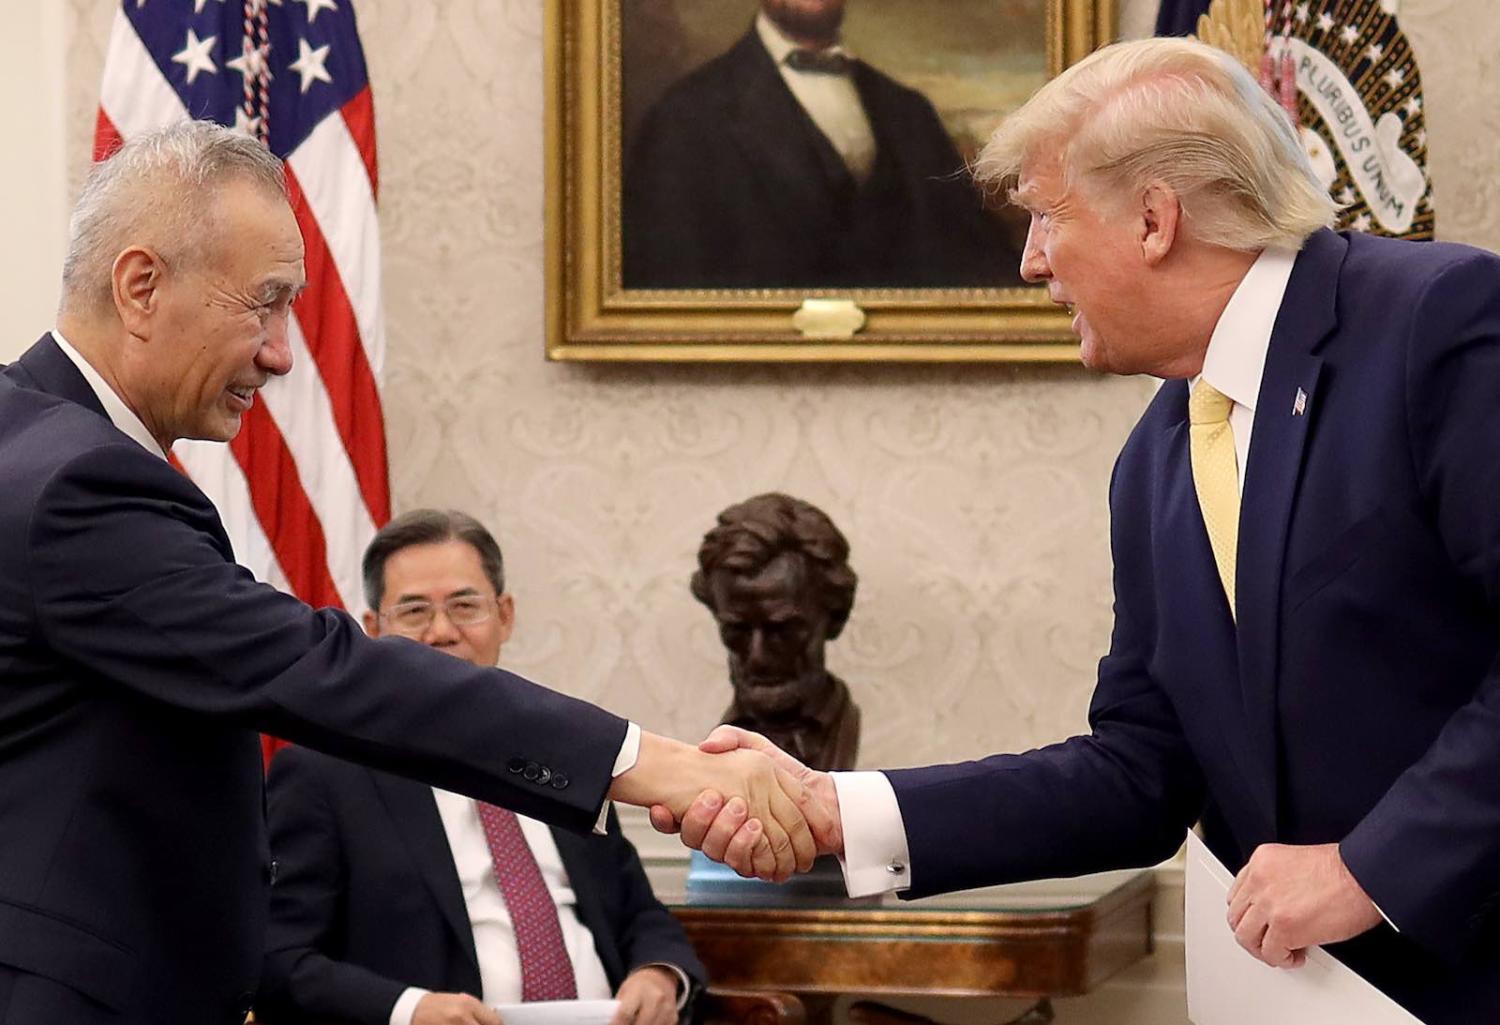 President Donald Trump shakes hands with Chinese Vice Premier Liu He after announcing a “phase one” trade agreement with China in the Oval Office on Friday (Photo: Win McNamee/Getty Images)